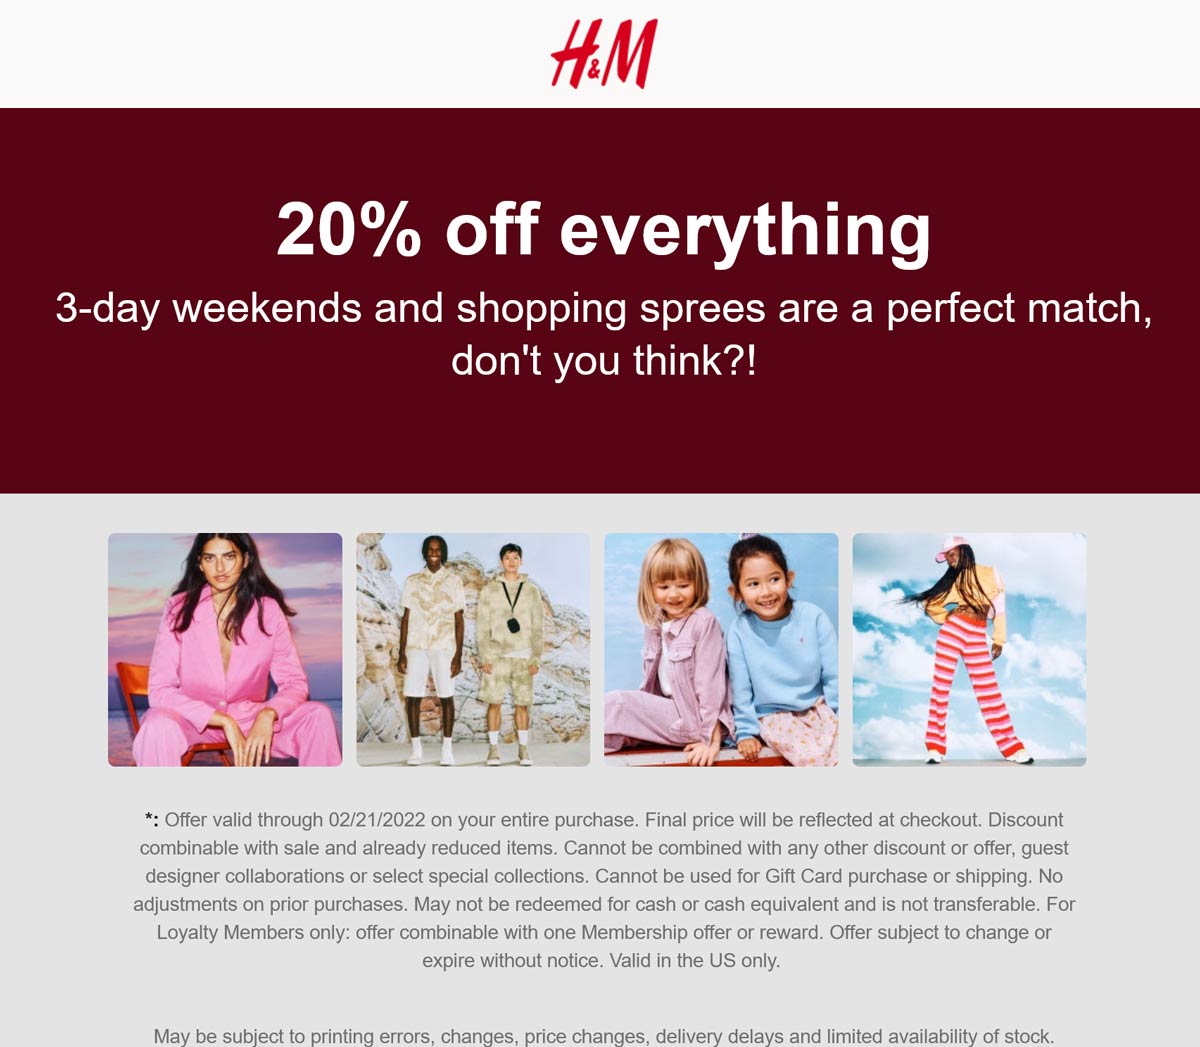 H&M stores Coupon  20% off everything today at H&M #hm 